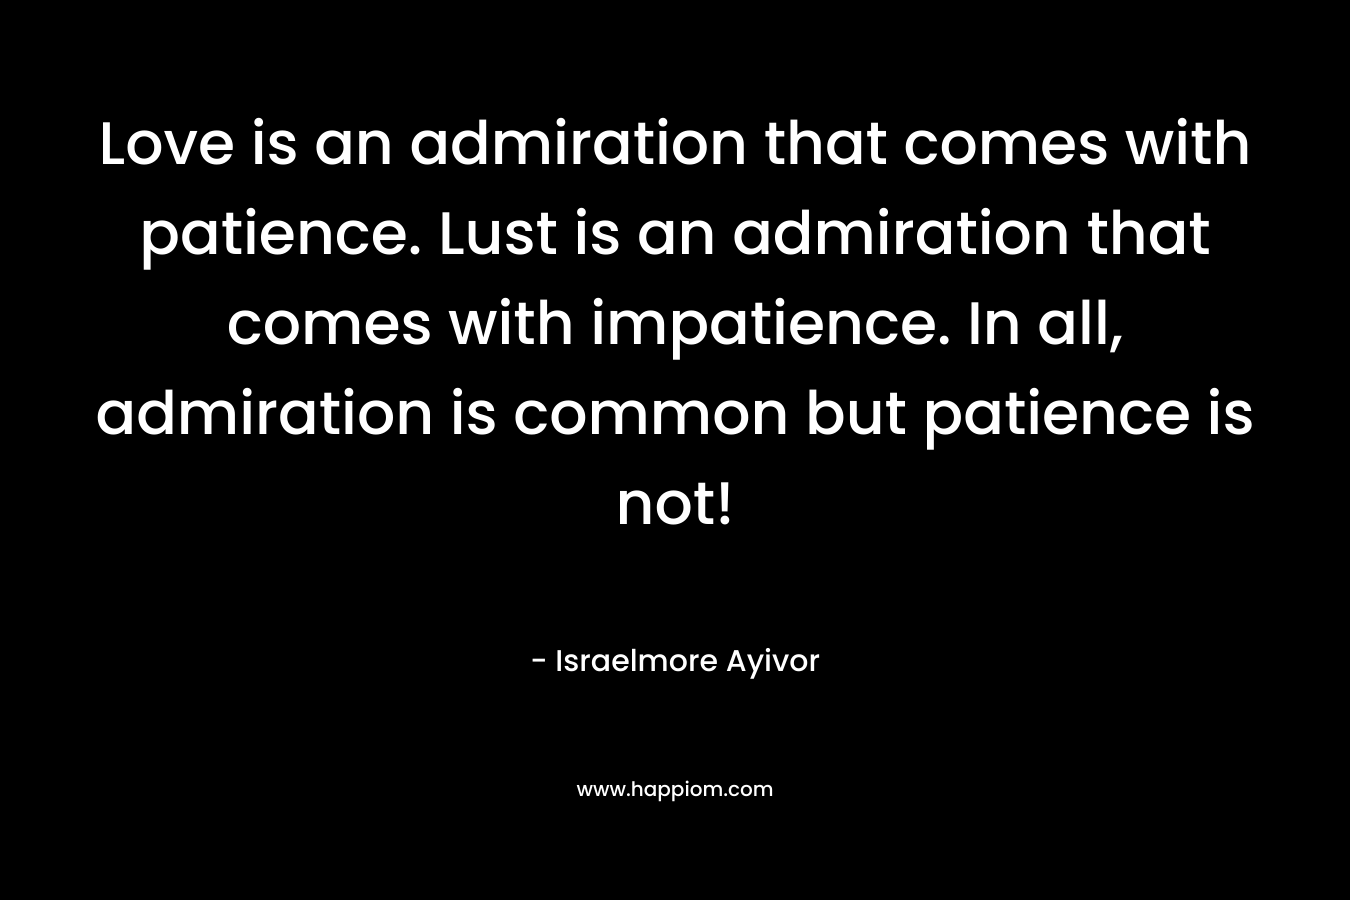 Love is an admiration that comes with patience. Lust is an admiration that comes with impatience. In all, admiration is common but patience is not!